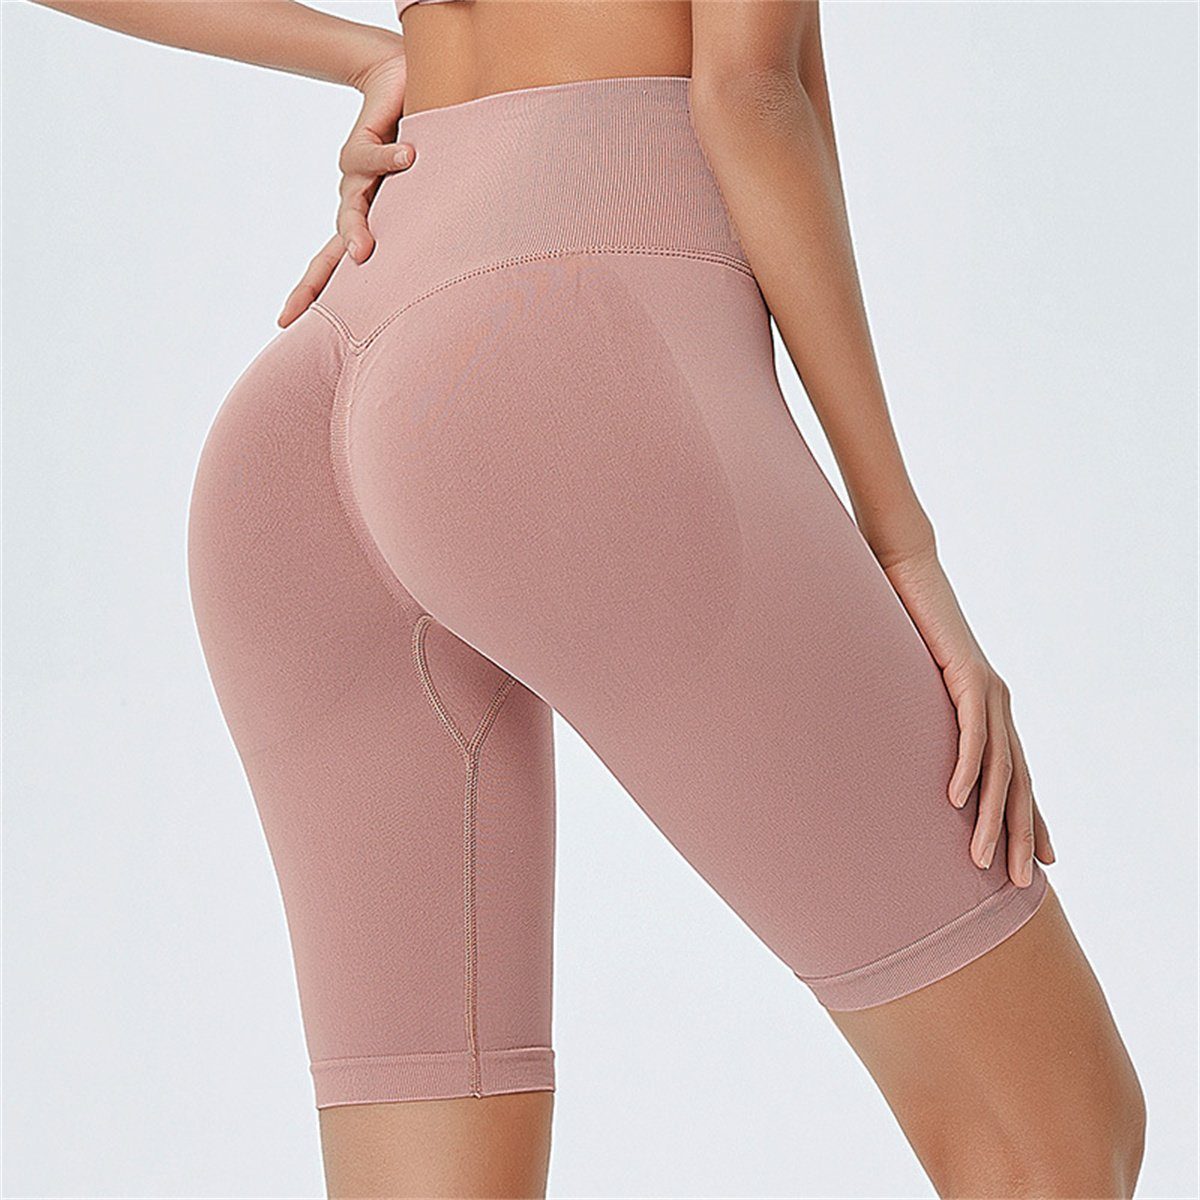 carefully Yogatights hoher hellrosa selected Taille Damen-Fitness-Po-Lifting-Yoga-Shorts mit